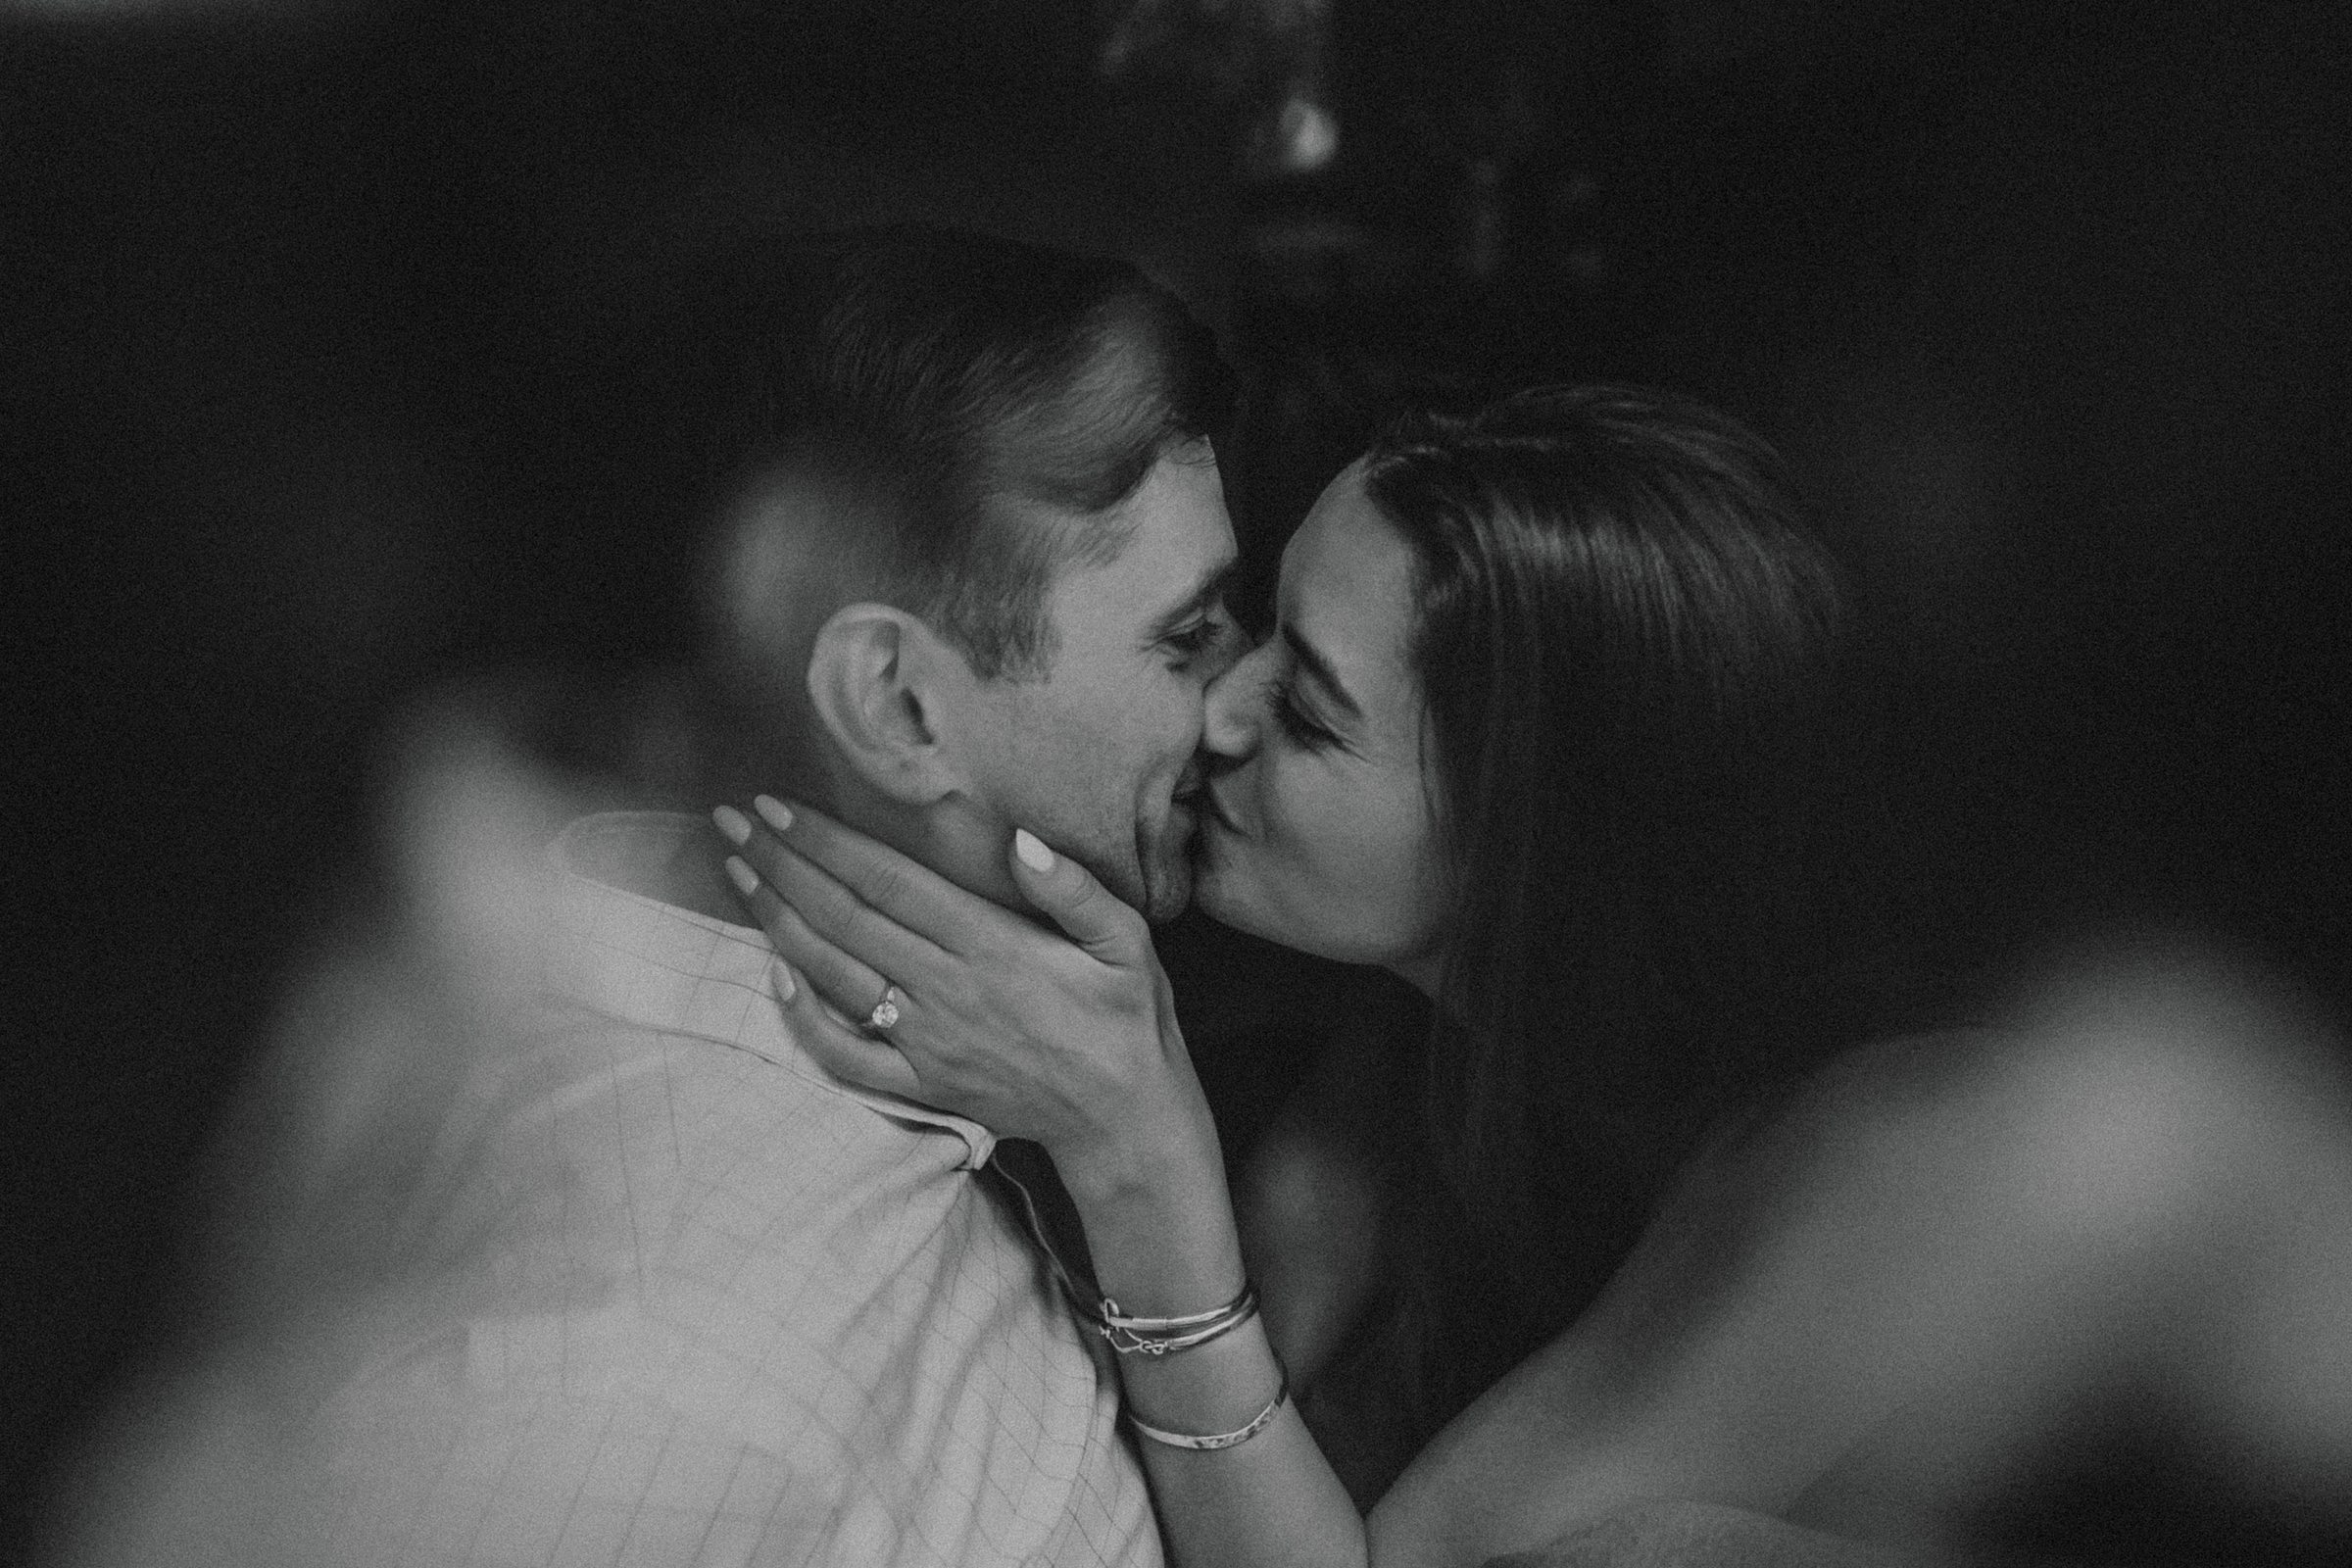 at home engagement session, New Jersey Wedding Photographer, New York Wedding Photographer, Intimate Engagement, Cozy rainy day, Chatham NJ, dancing in the living room, blurry black and white photos